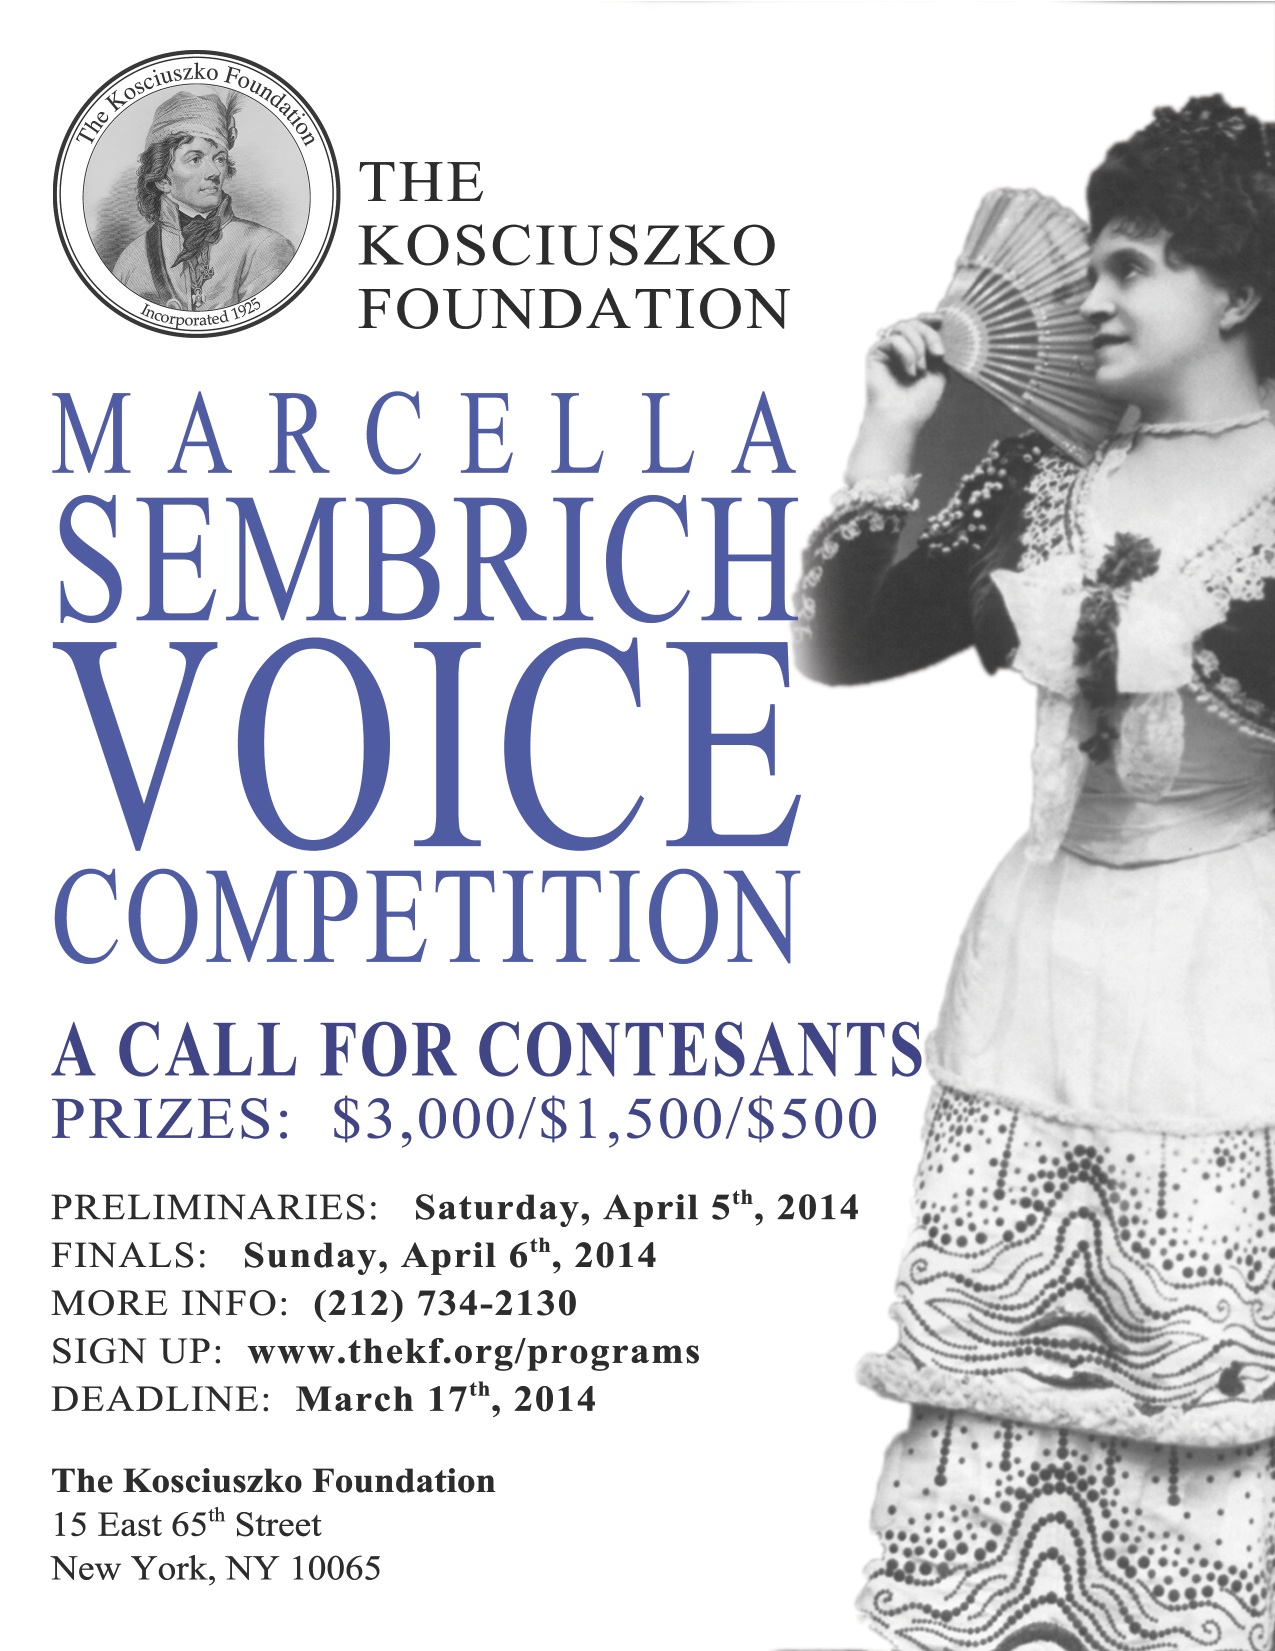 Marcella Sembrich Memorial Voice Scholarship Competition will take place in New York at The Kosciuszko Foundation on April 5th and 6th, 2014